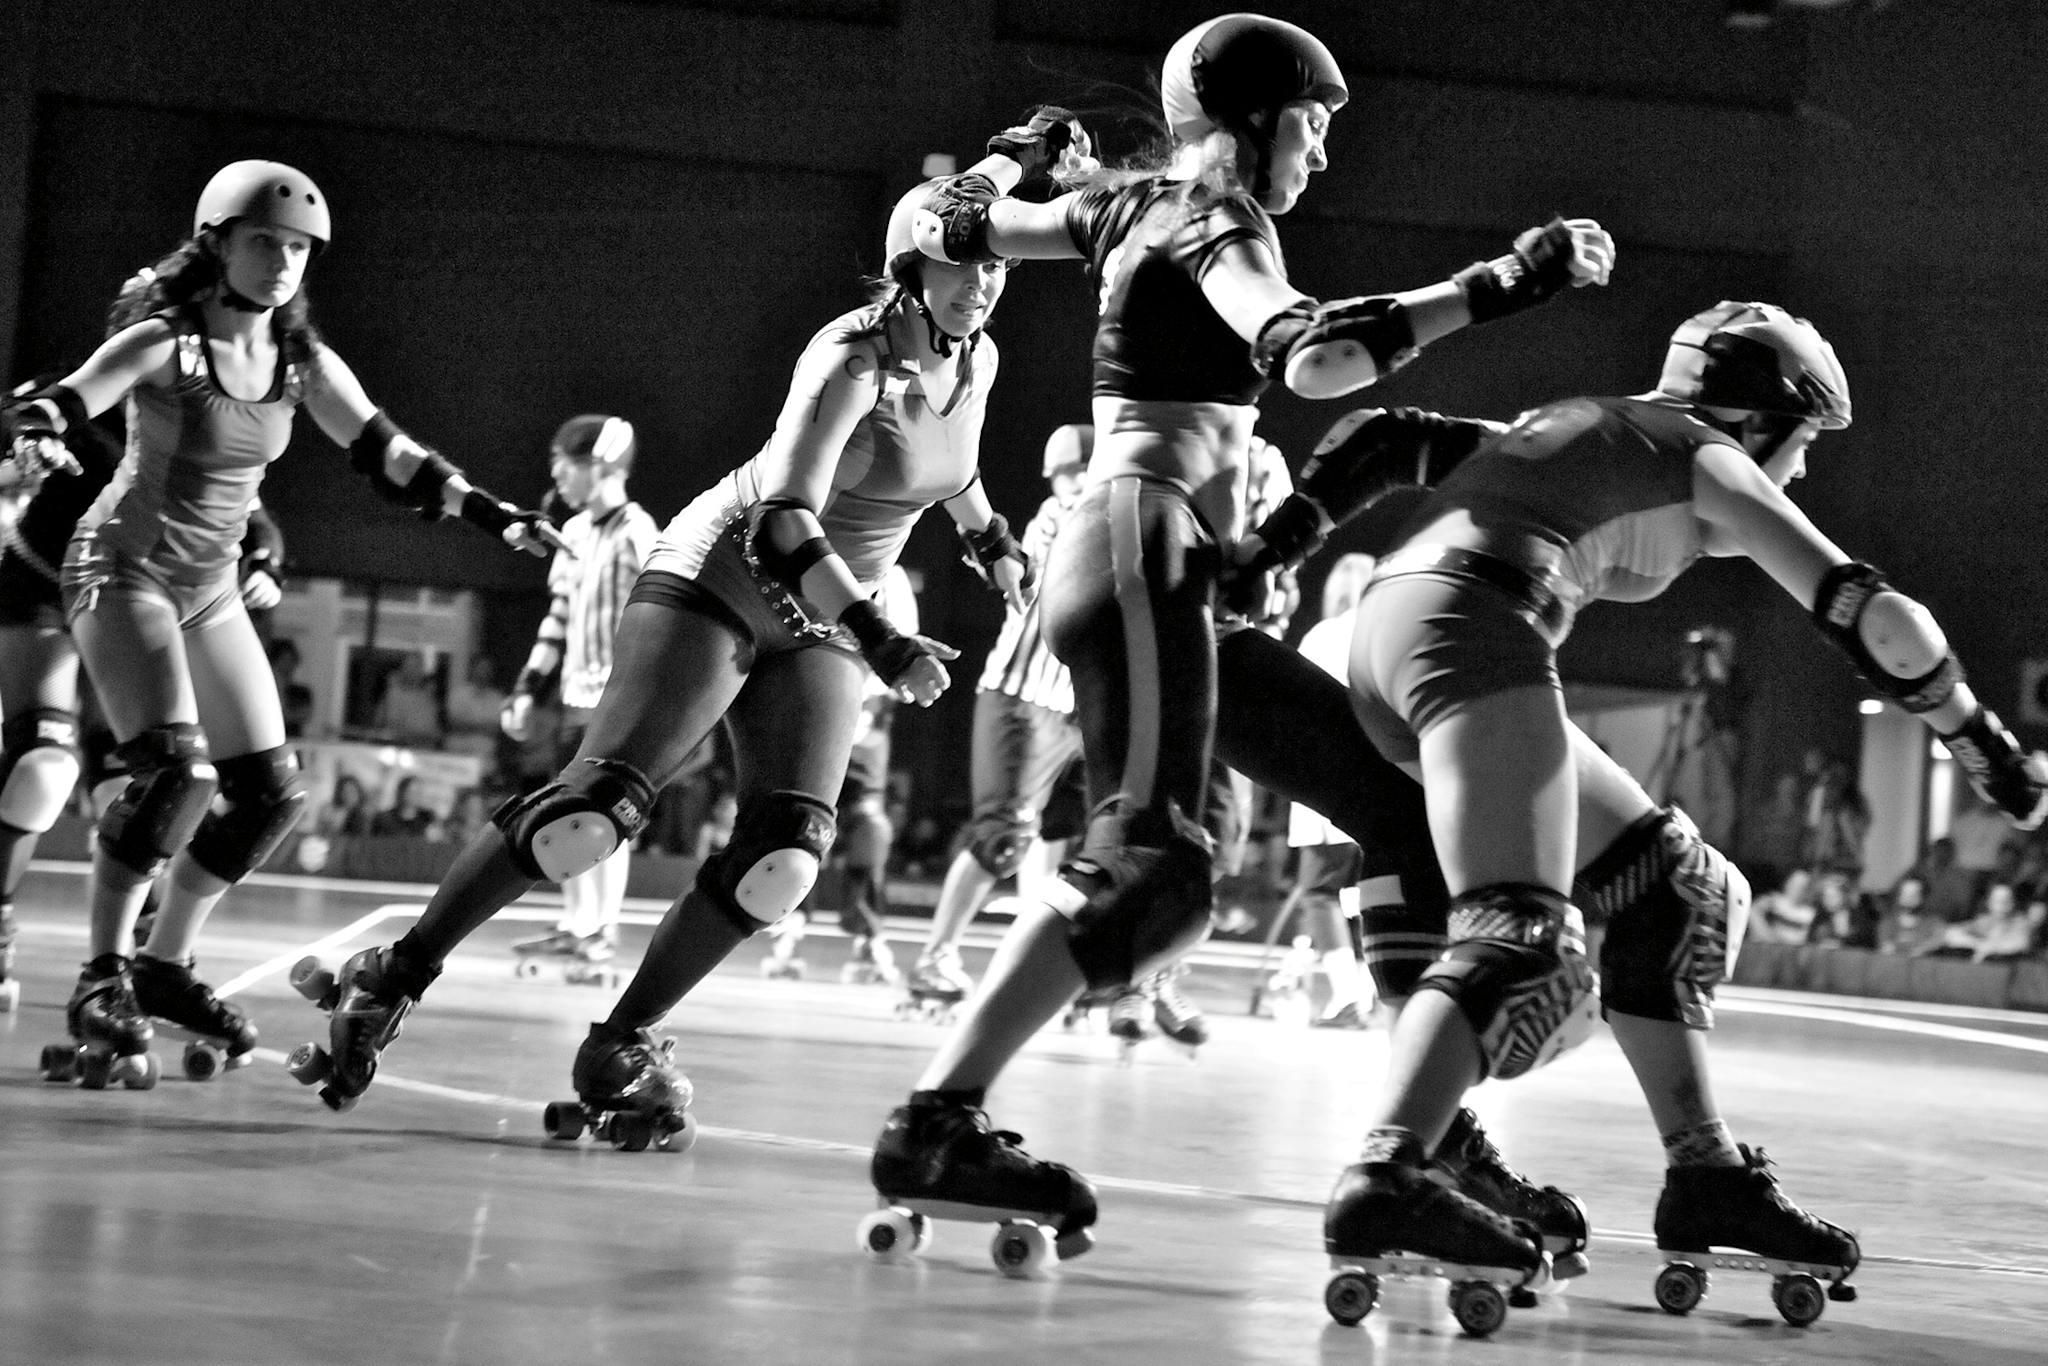 Players Chasing Amy, Babe Ruthless, Voodoo Doll, and Molotov M. Pale during a roller derby bout